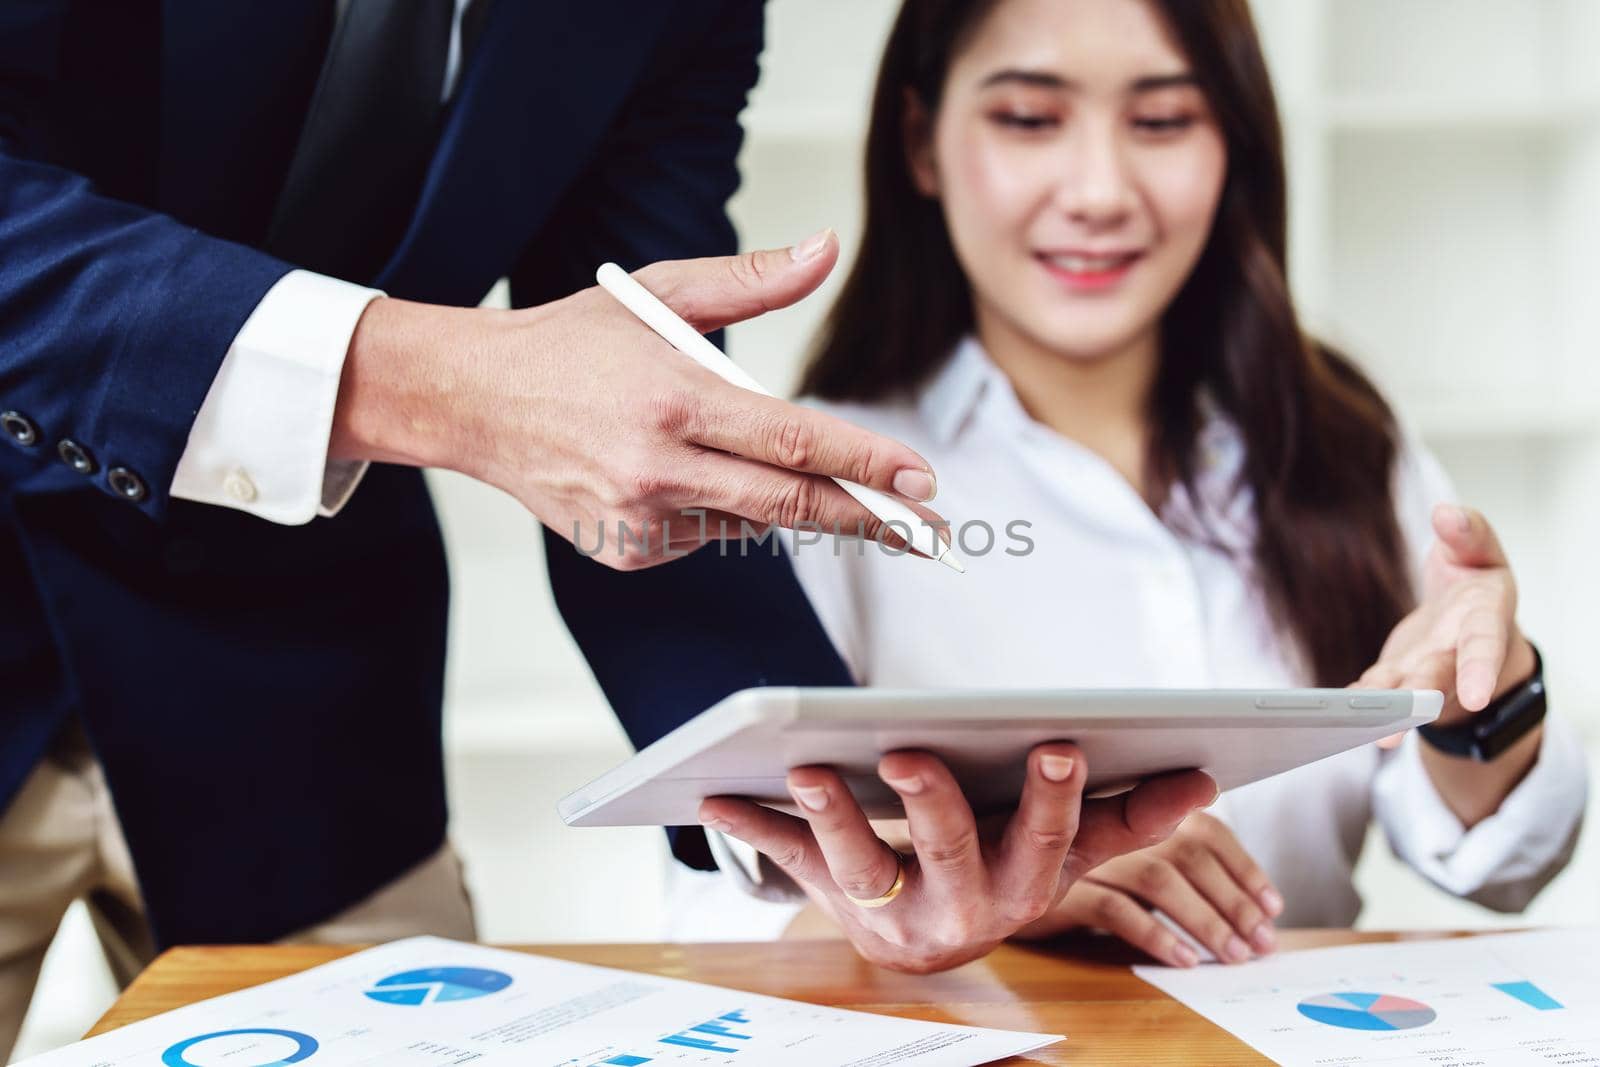 Planning to reduce investment risks, the image of a group of businesspeople working with partners is adjusting marketing strategies to analyze profitable and targeted customer needs at meetings by Manastrong